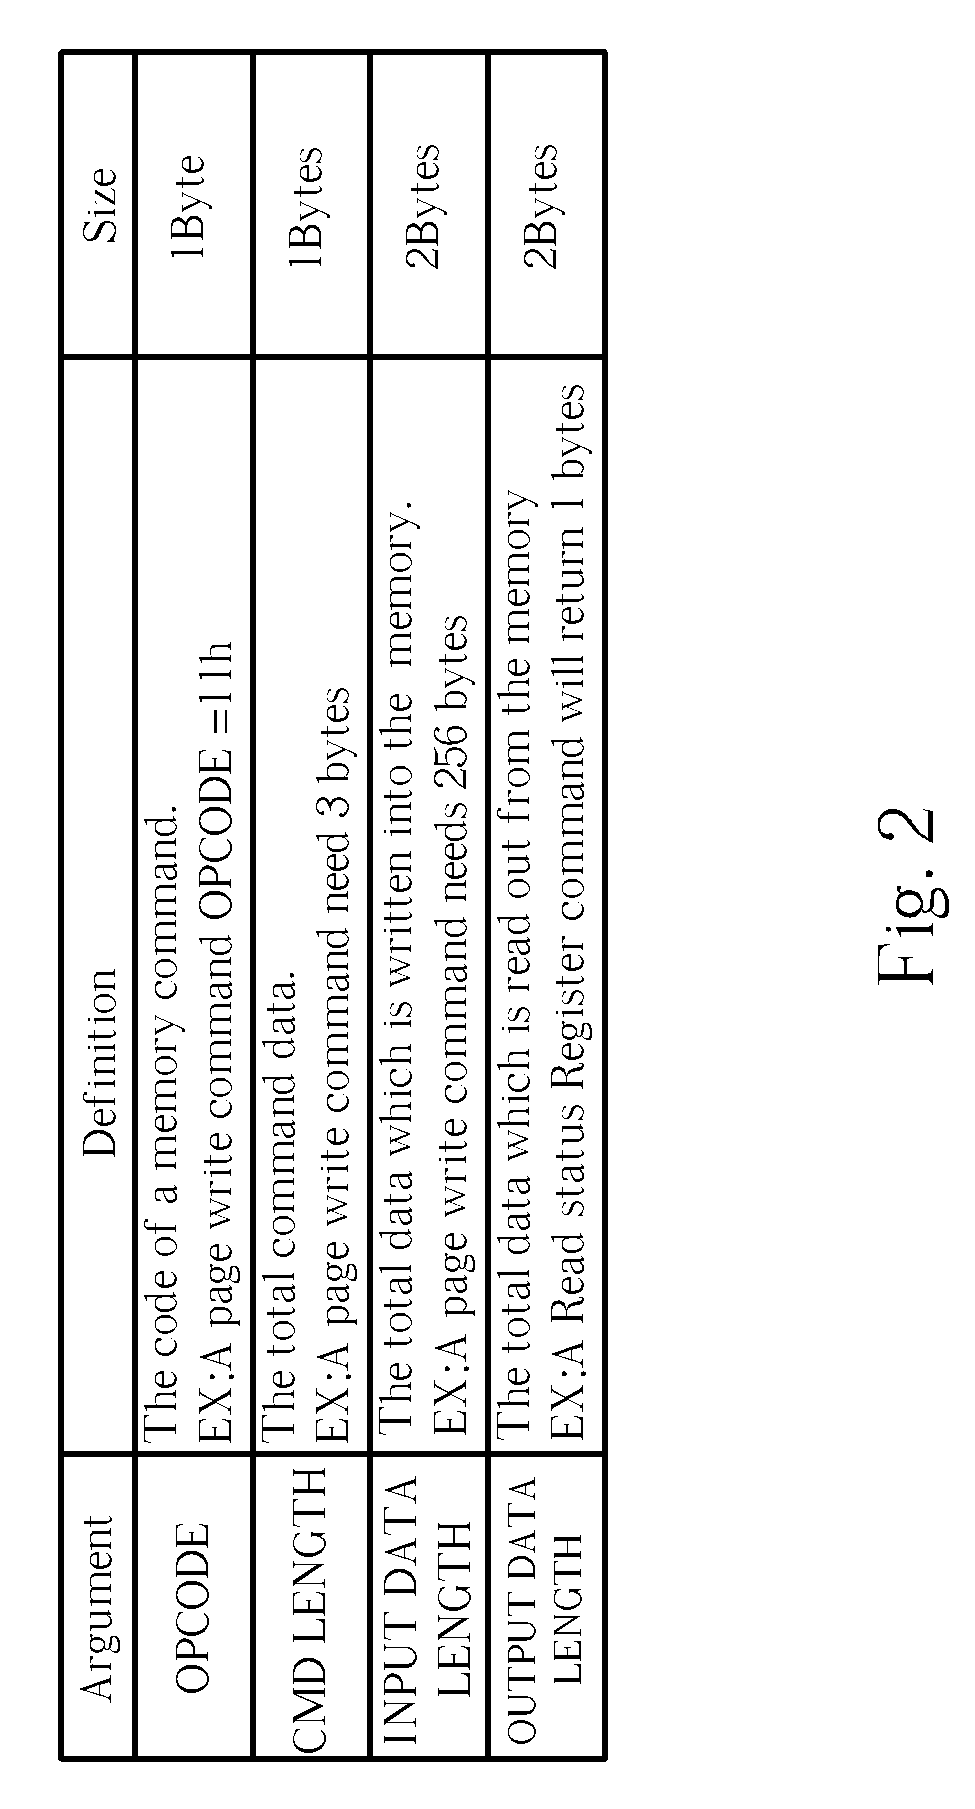 Peripheral device and method for interpreting redefined frame information structure